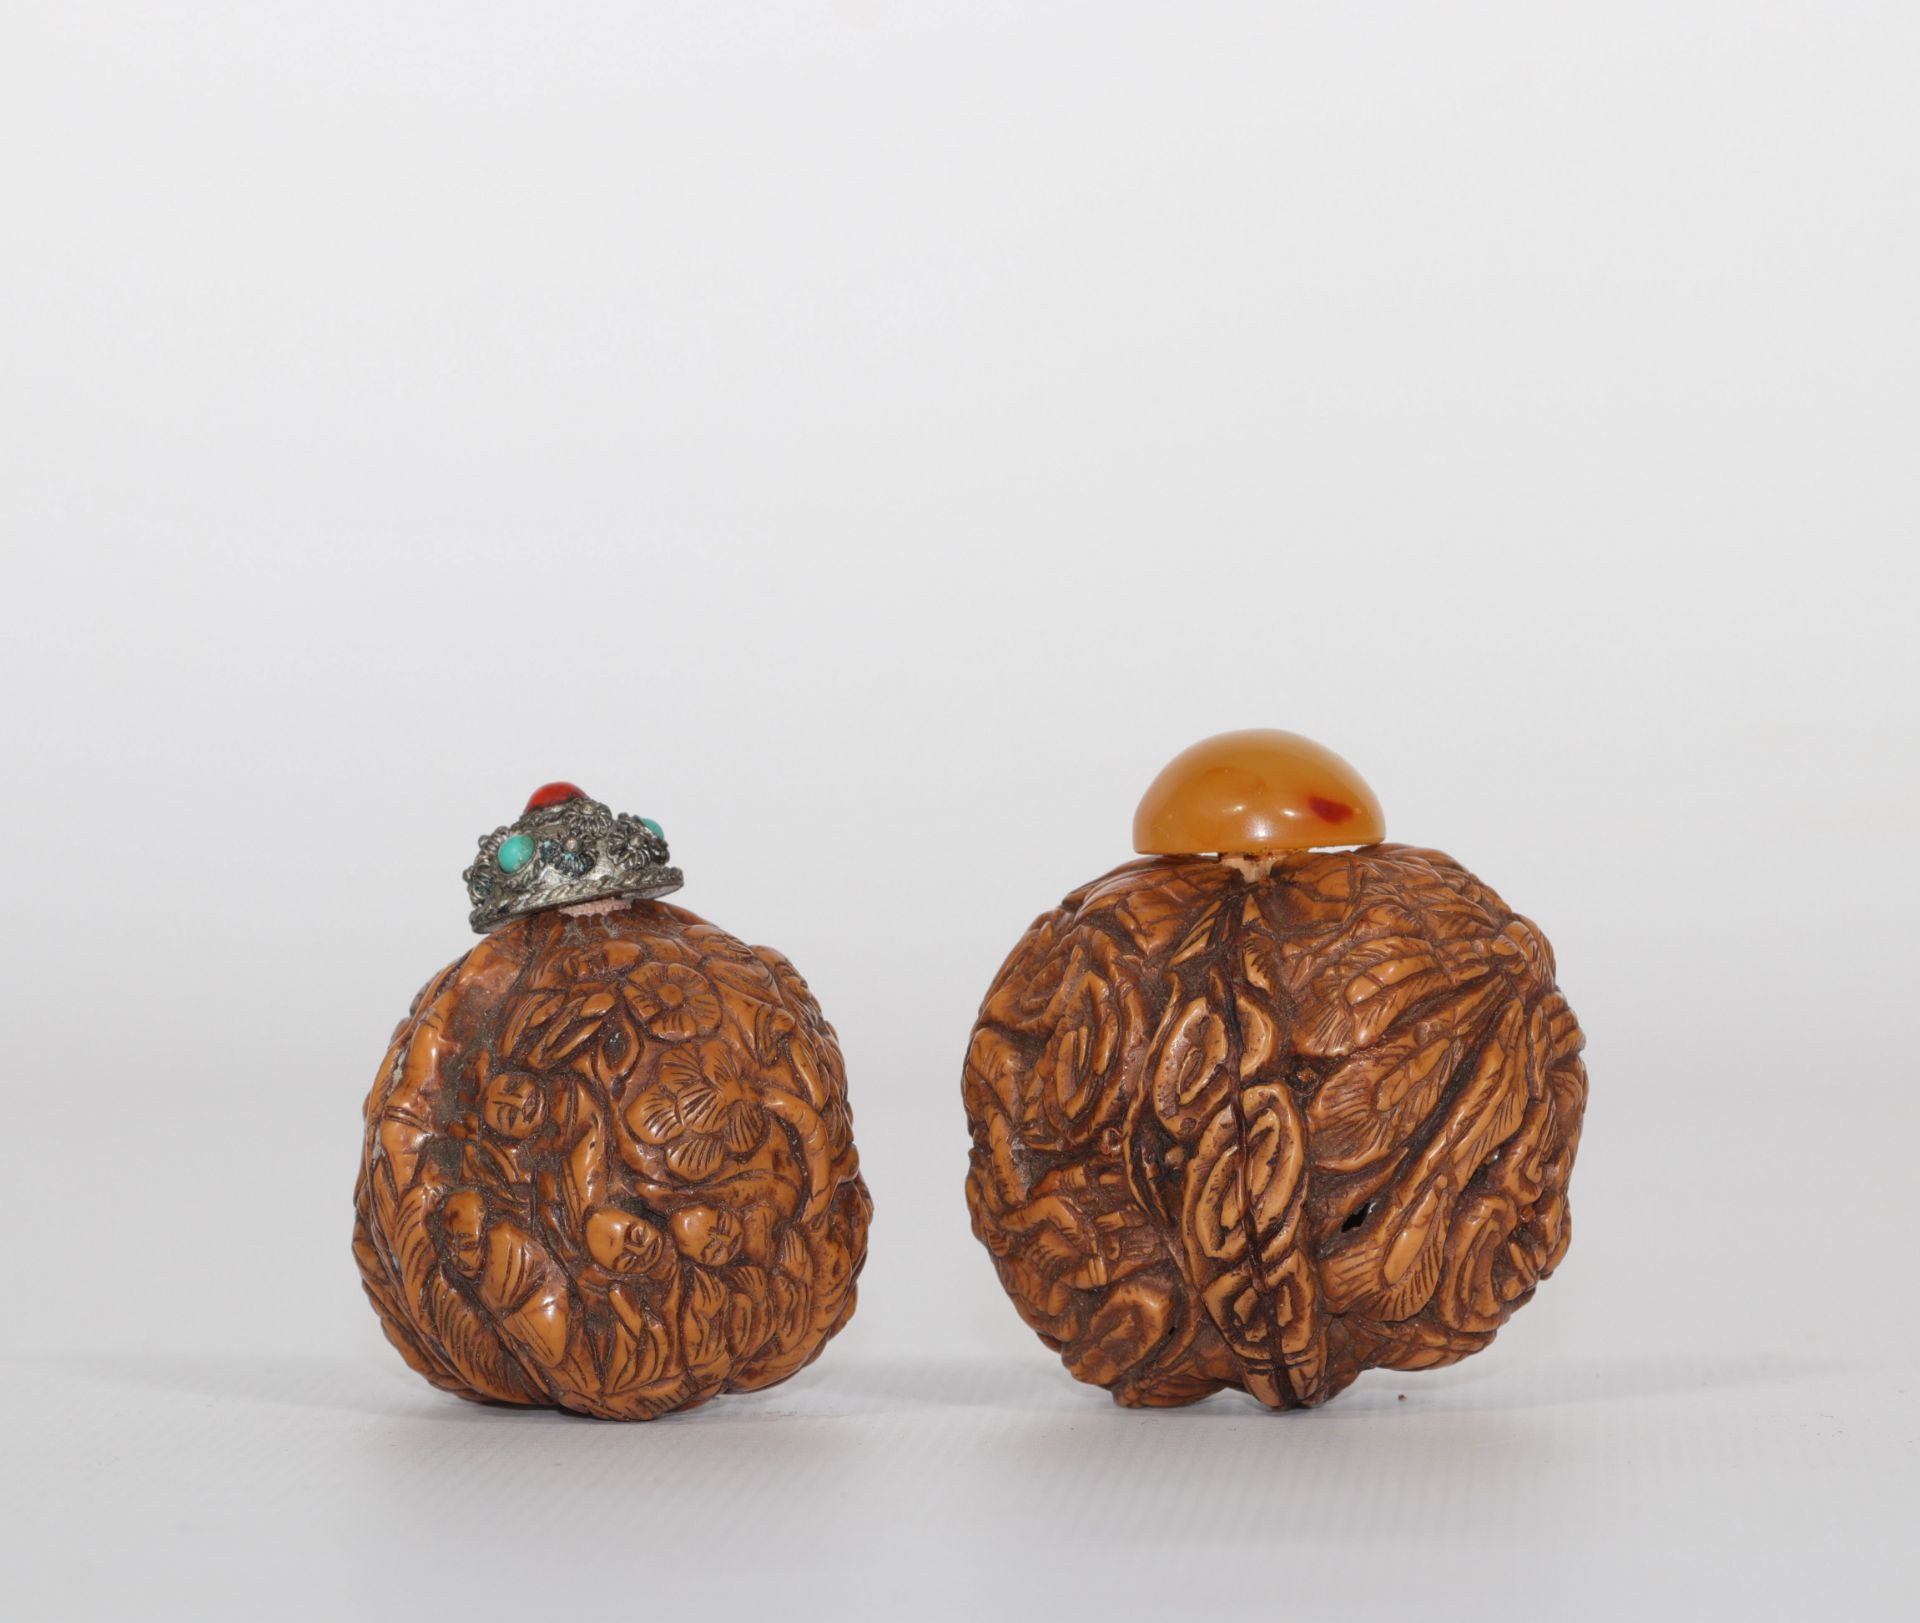 China snuffboxes (2) walnuts carved with characters